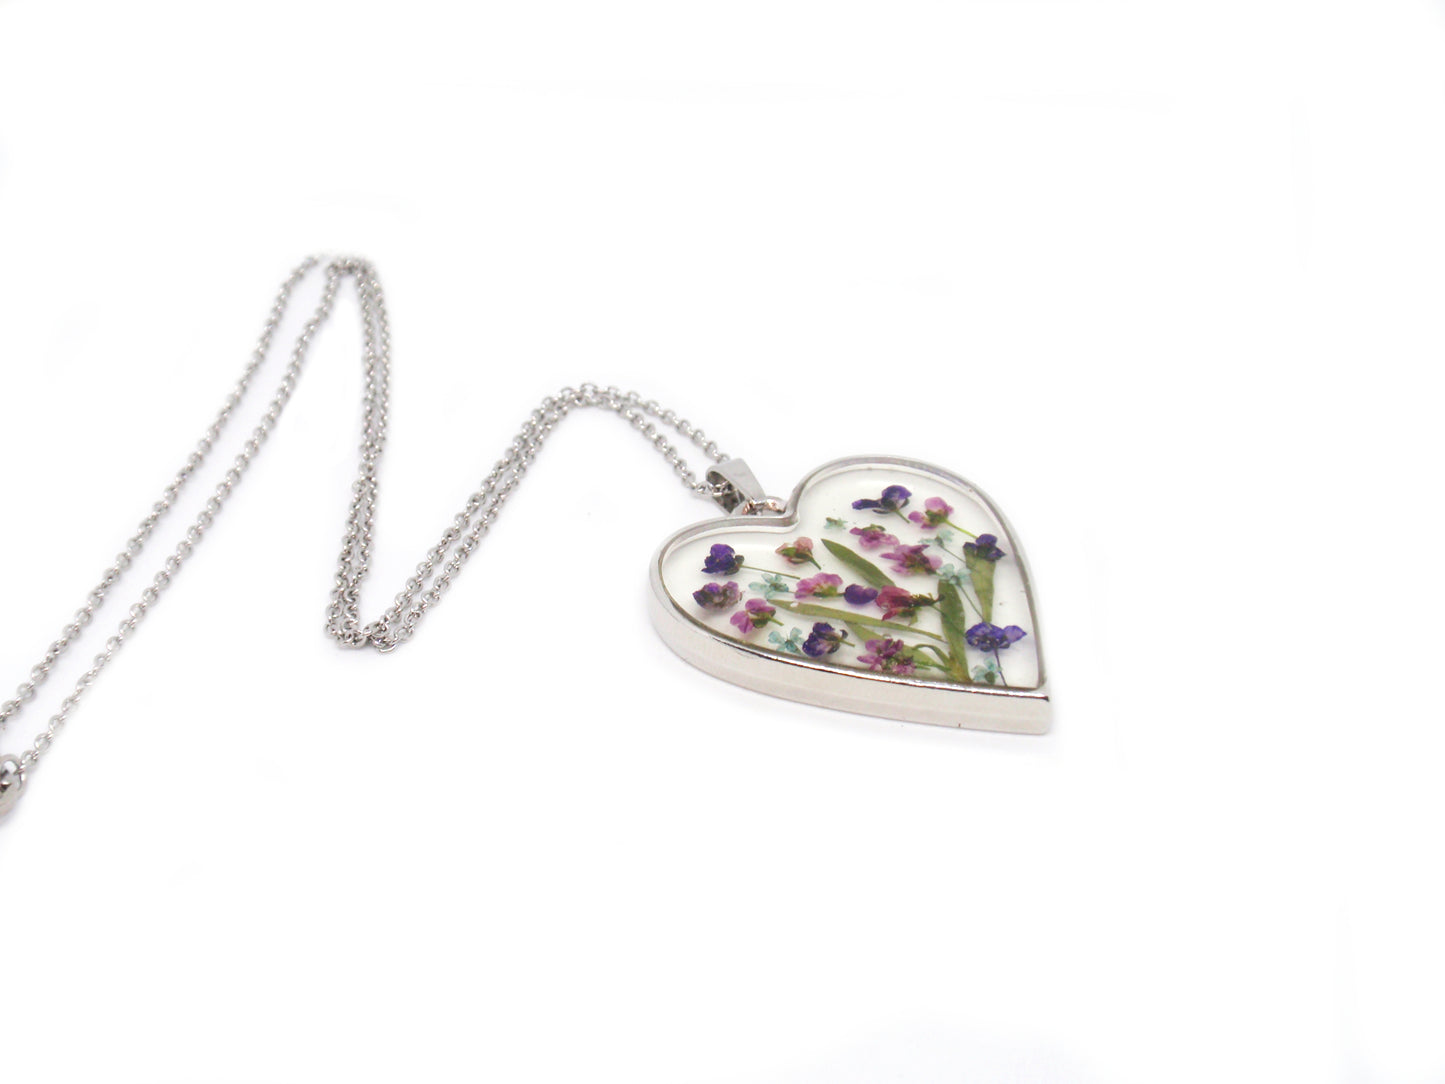 Heart shape resin necklace with real flowers